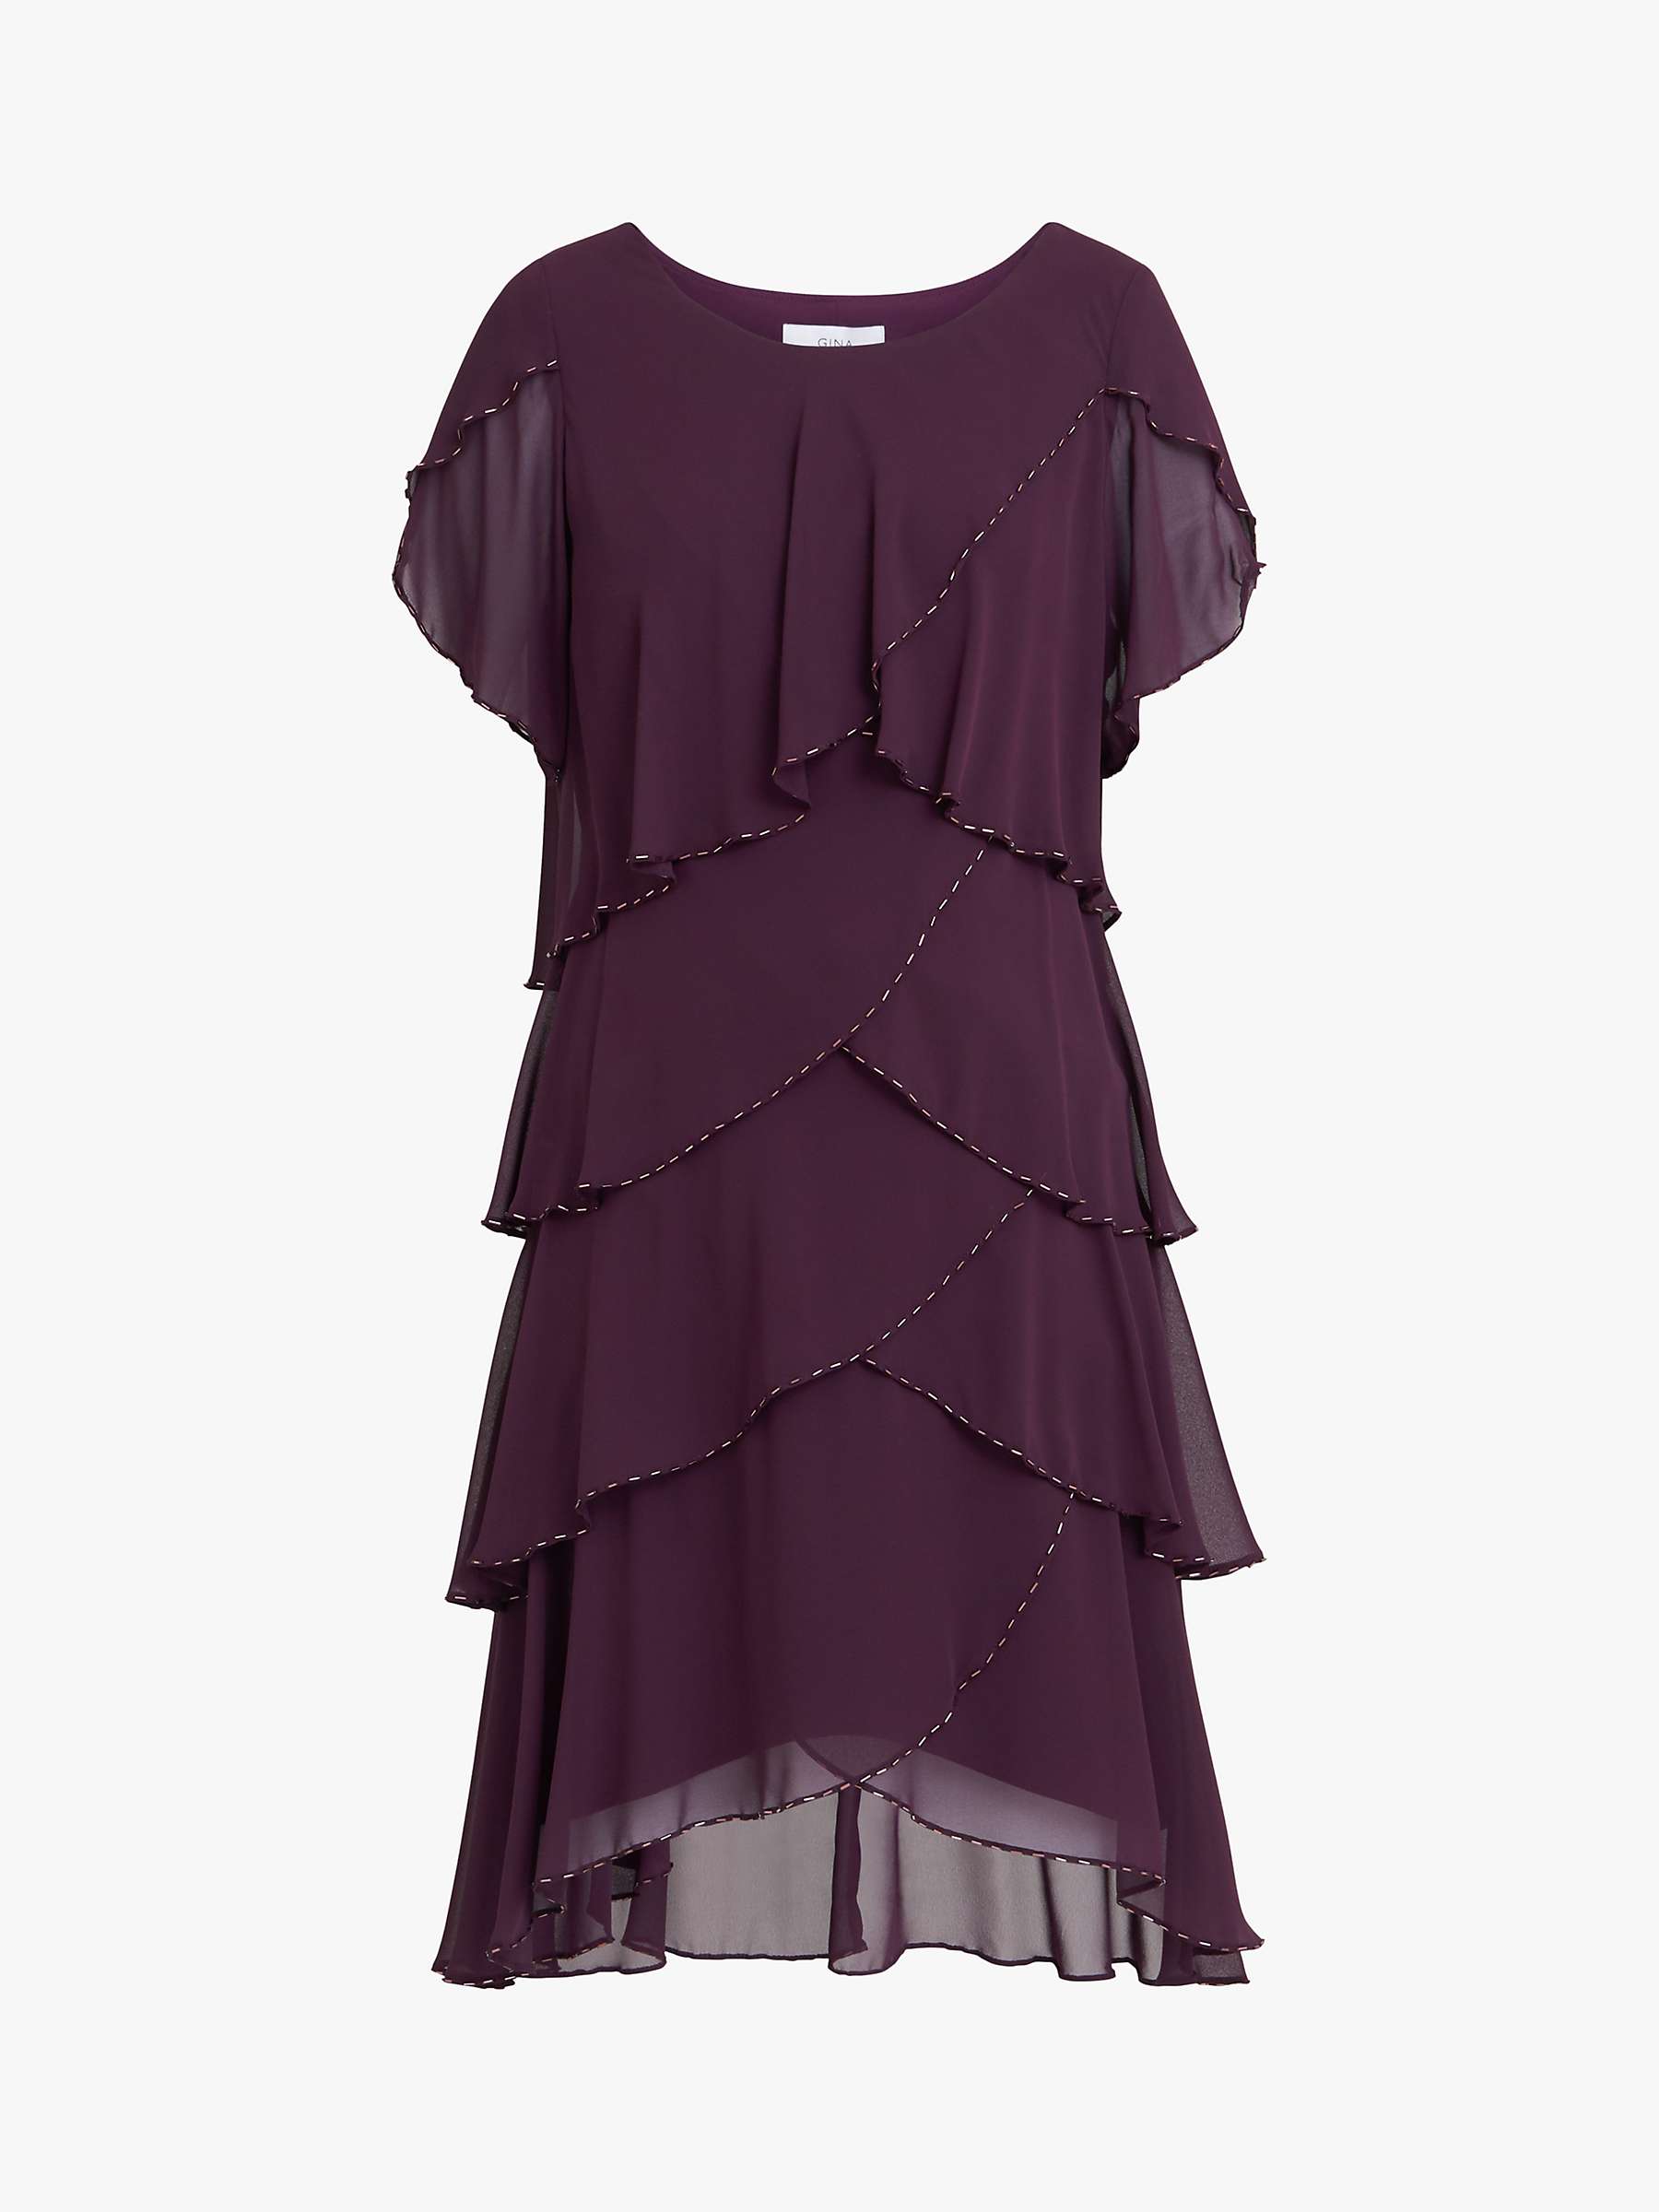 Buy Gina Bacconi Trysta Bugle Beaded Tiered Dress, Aubergine Online at johnlewis.com